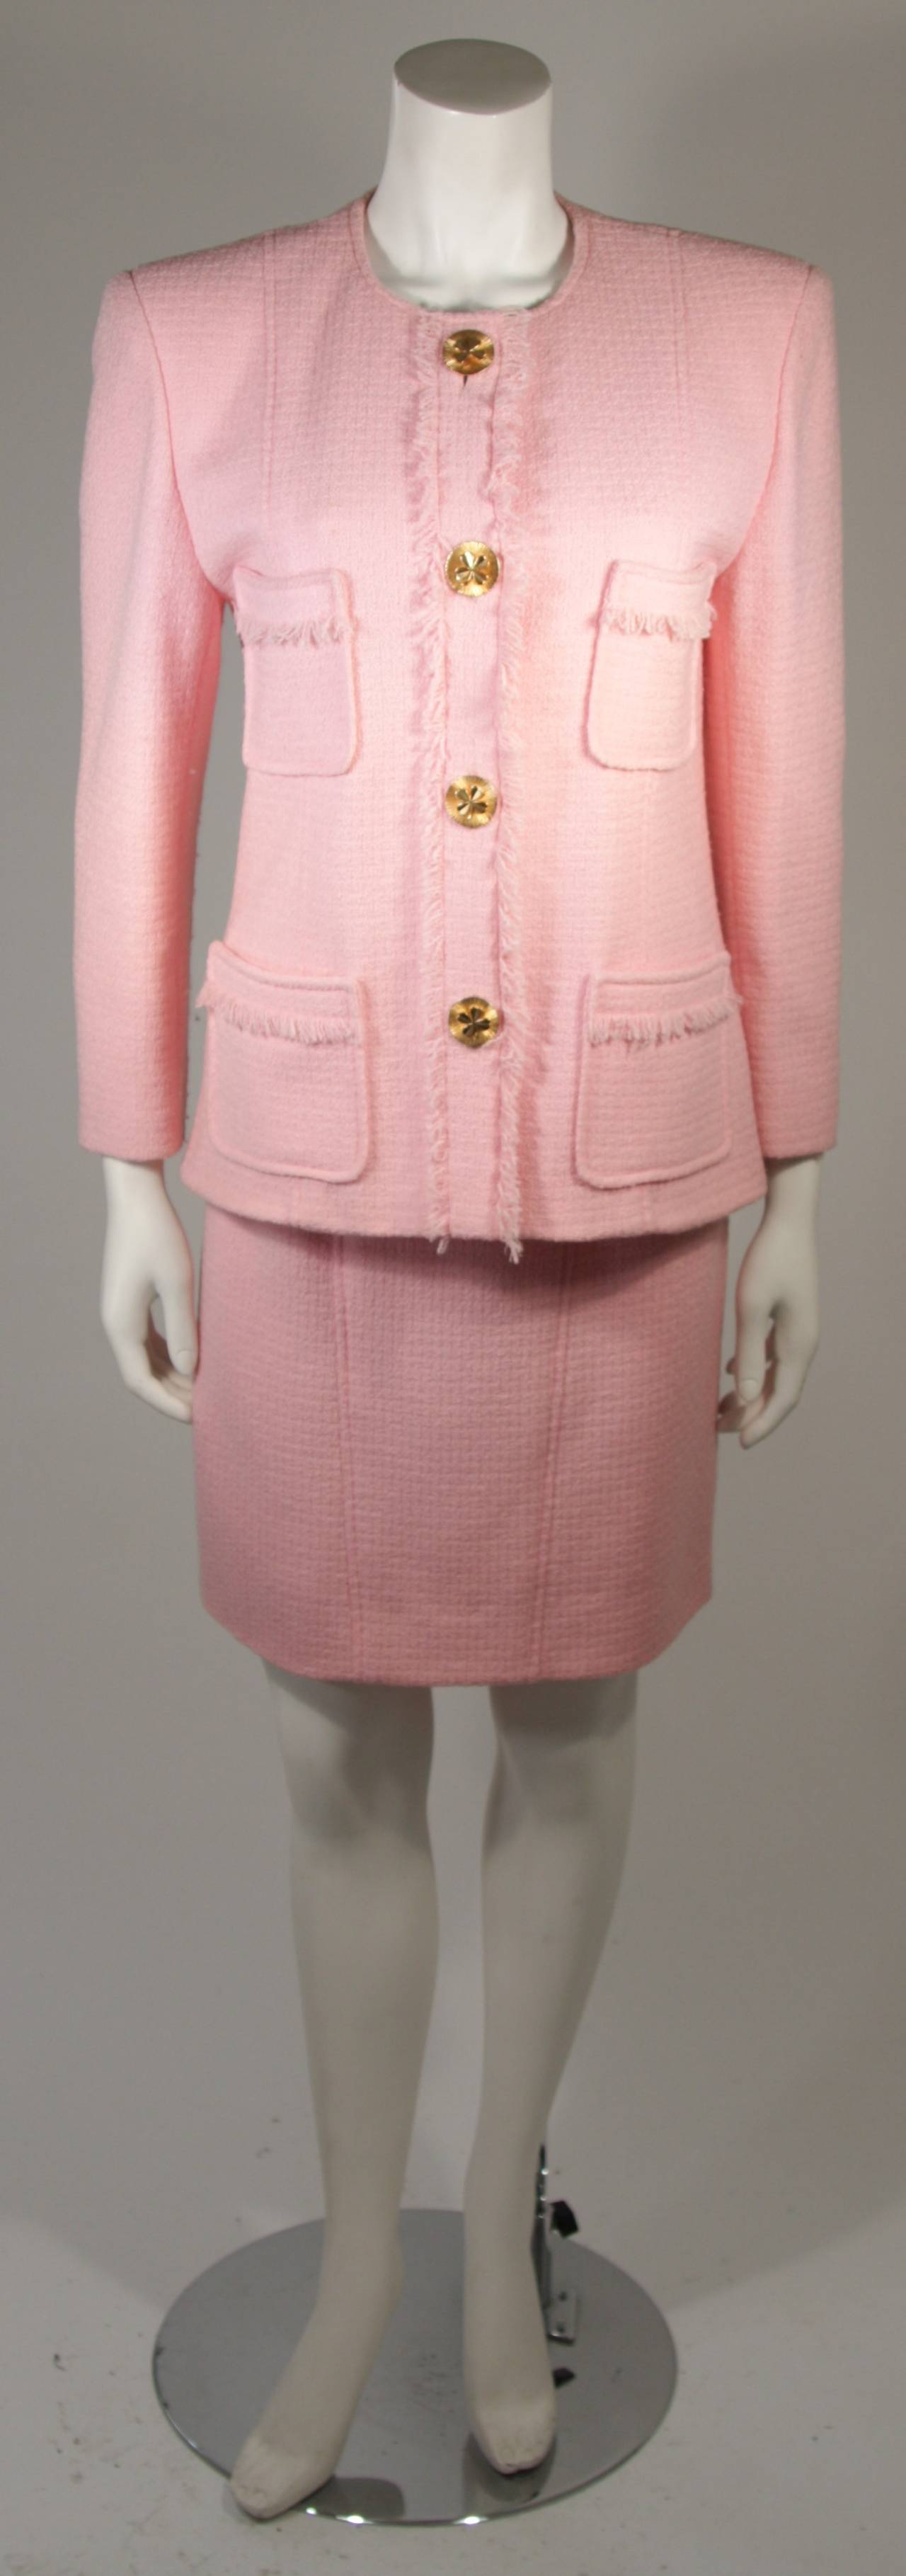 This Chanel skirt suit is available for viewing at our Beverly Hills Boutique. We offer a large selection of evening gowns and luxury garments.

Gorgeous two piece pink wool boucle Jacket and fitted skirt. The jacket has 4 buttons up the center